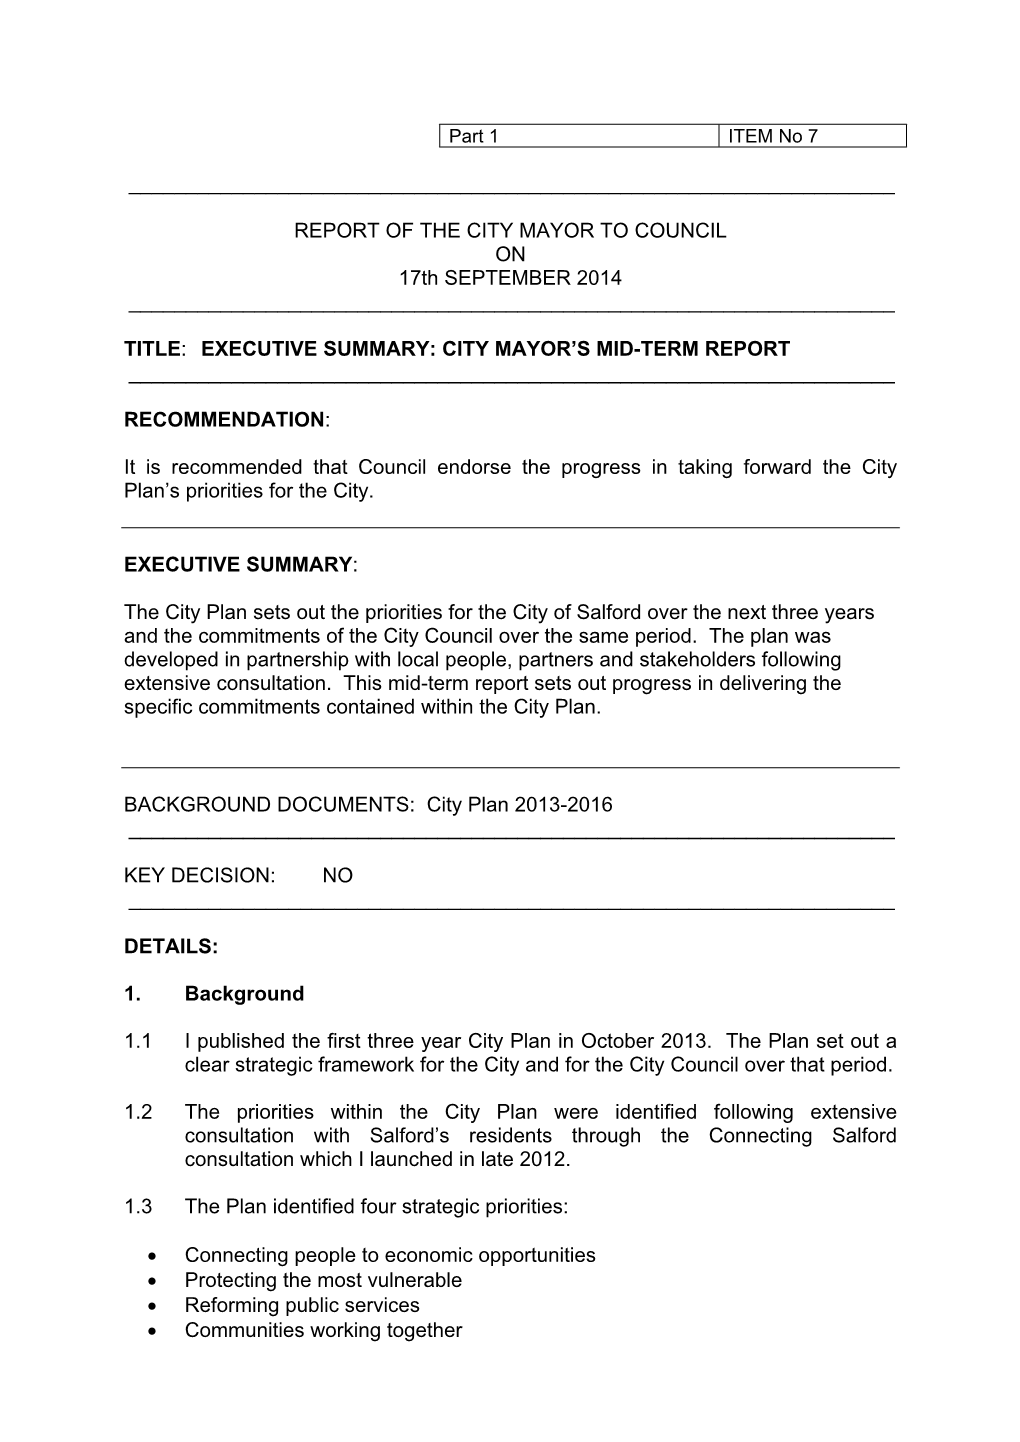 REPORT of the CITY MAYOR to COUNCIL on 17Th SEPTEMBER 2014 ______